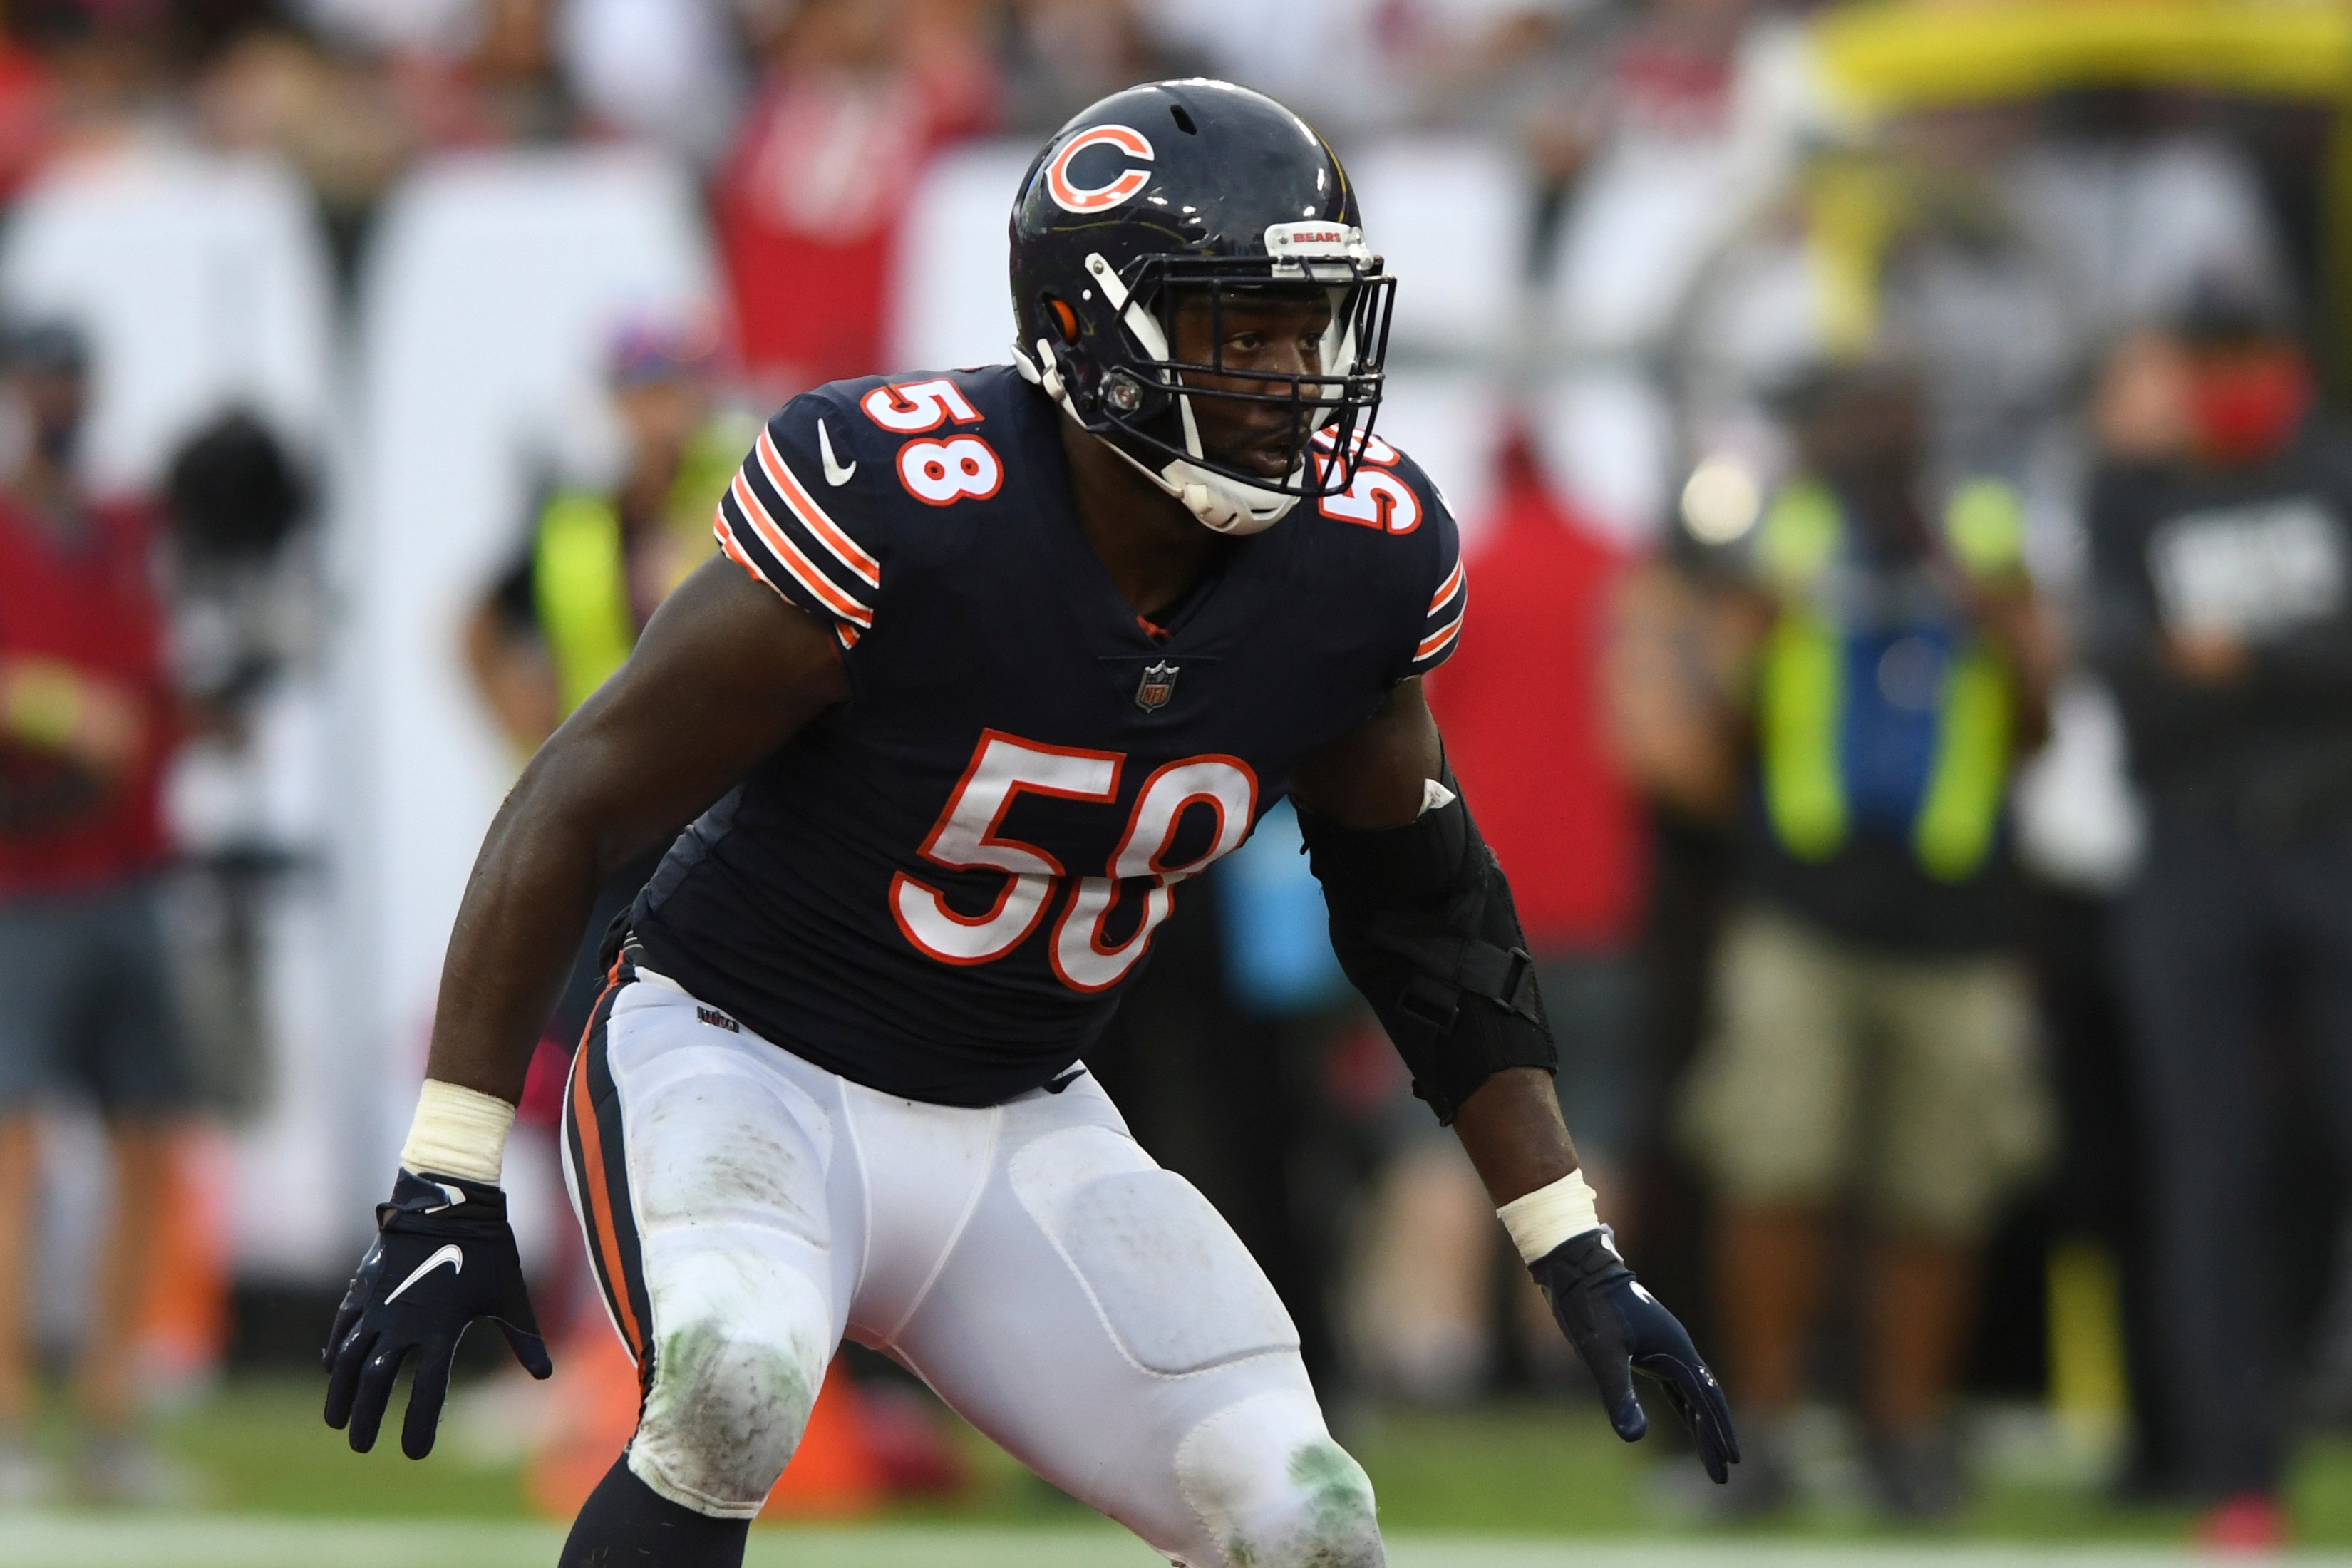 Bears 2021 ILB review: Roquan Smith continues to shine